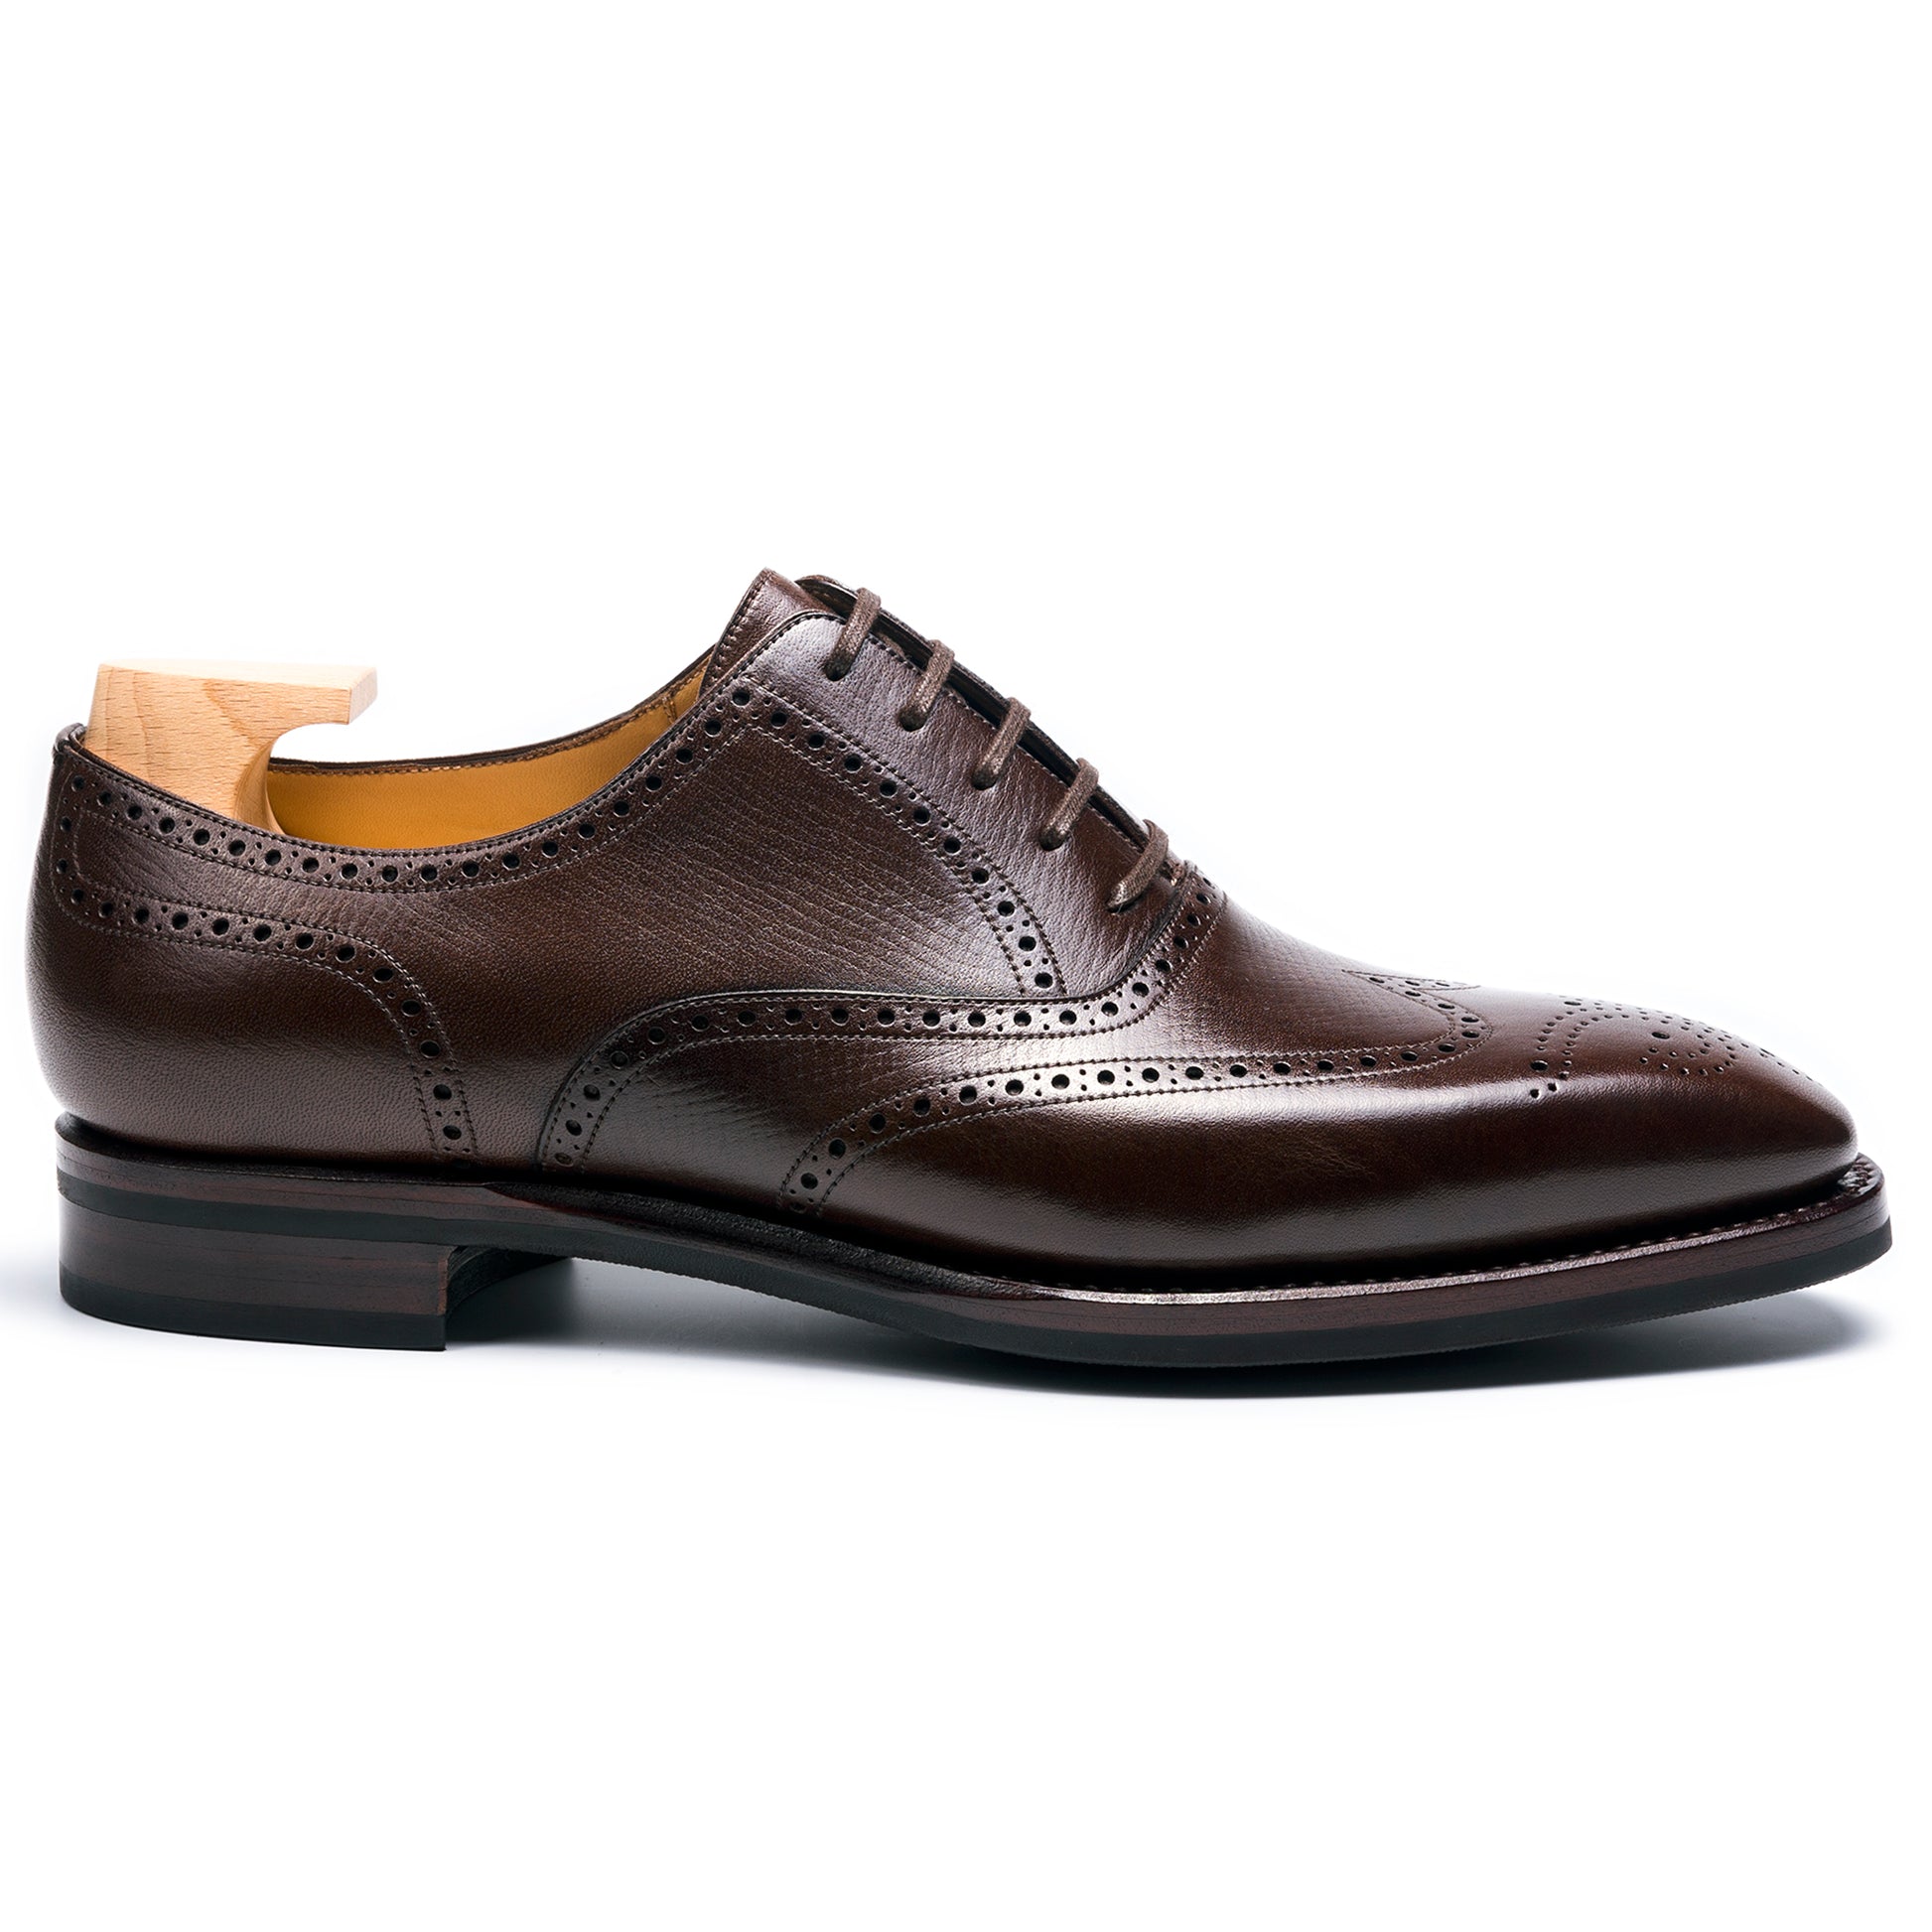 TLB Mallorca leather shoes 110 / PICASSO / HATCH GRAIN DARK BROWN